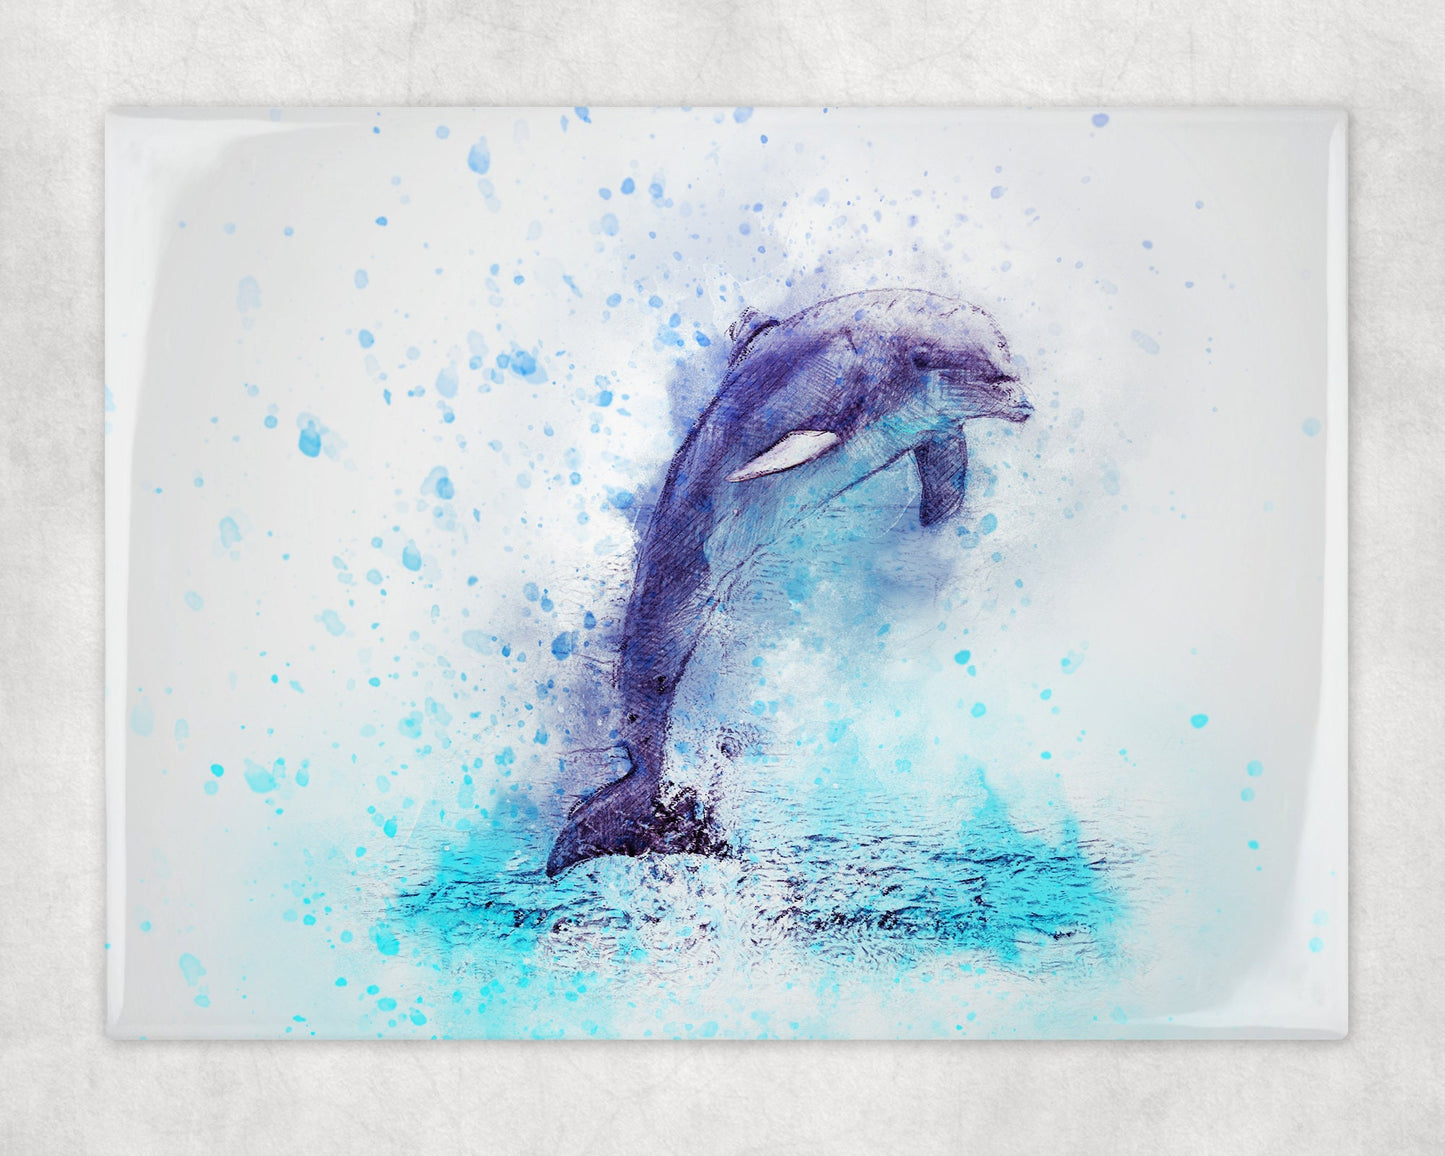 Watercolor Style Dolphin Art Decorative Ceramic Tile with Optional Easel Back - 6x8 inches